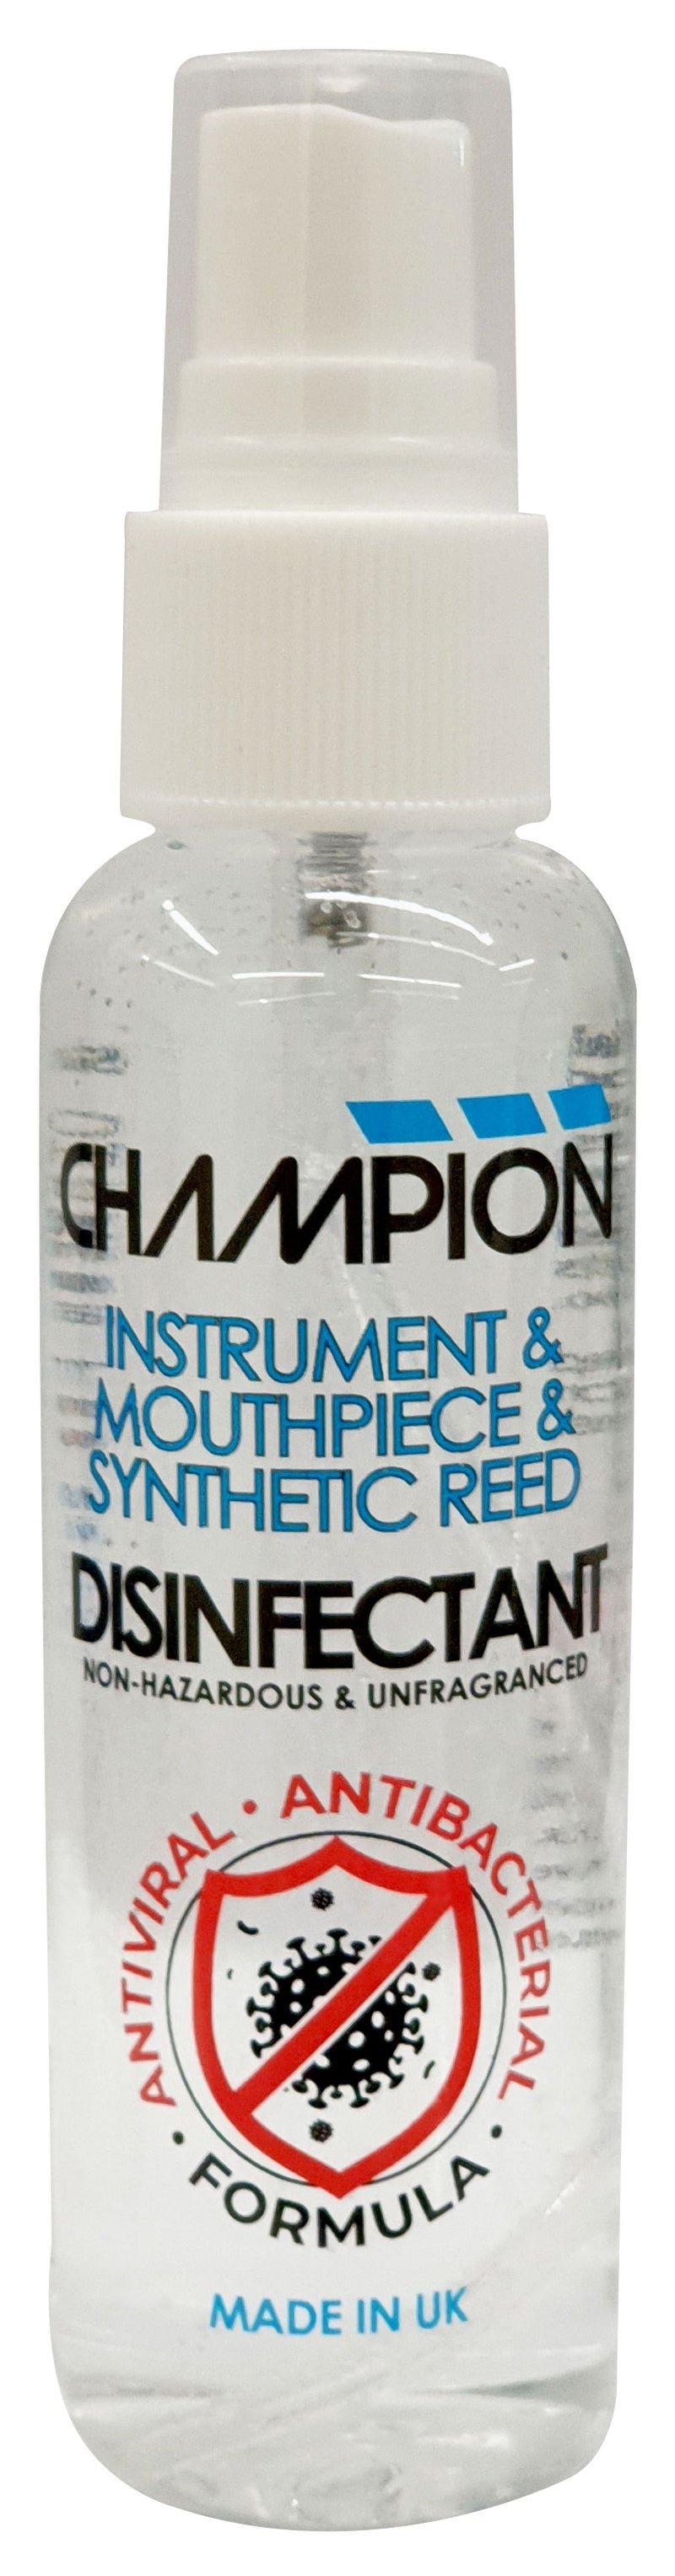 Champion Instrument/Mouthpiece & Synthetic Reed Disinfectant